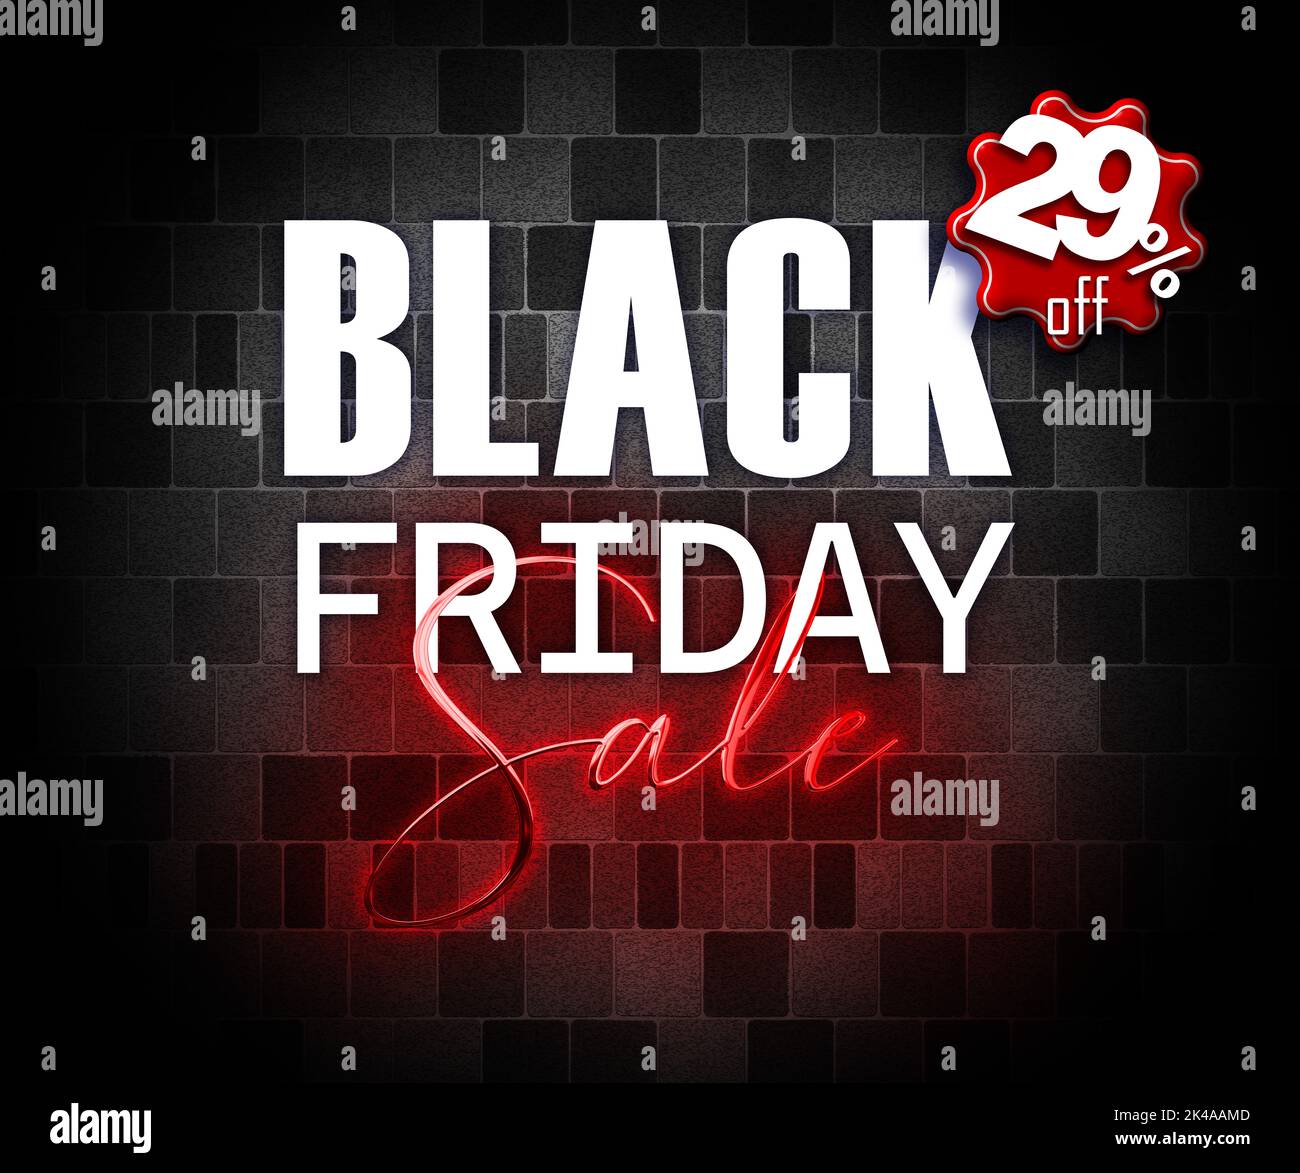 illustration with 3d elements black friday promotion banner 29 percent off sales increase Stock Photo